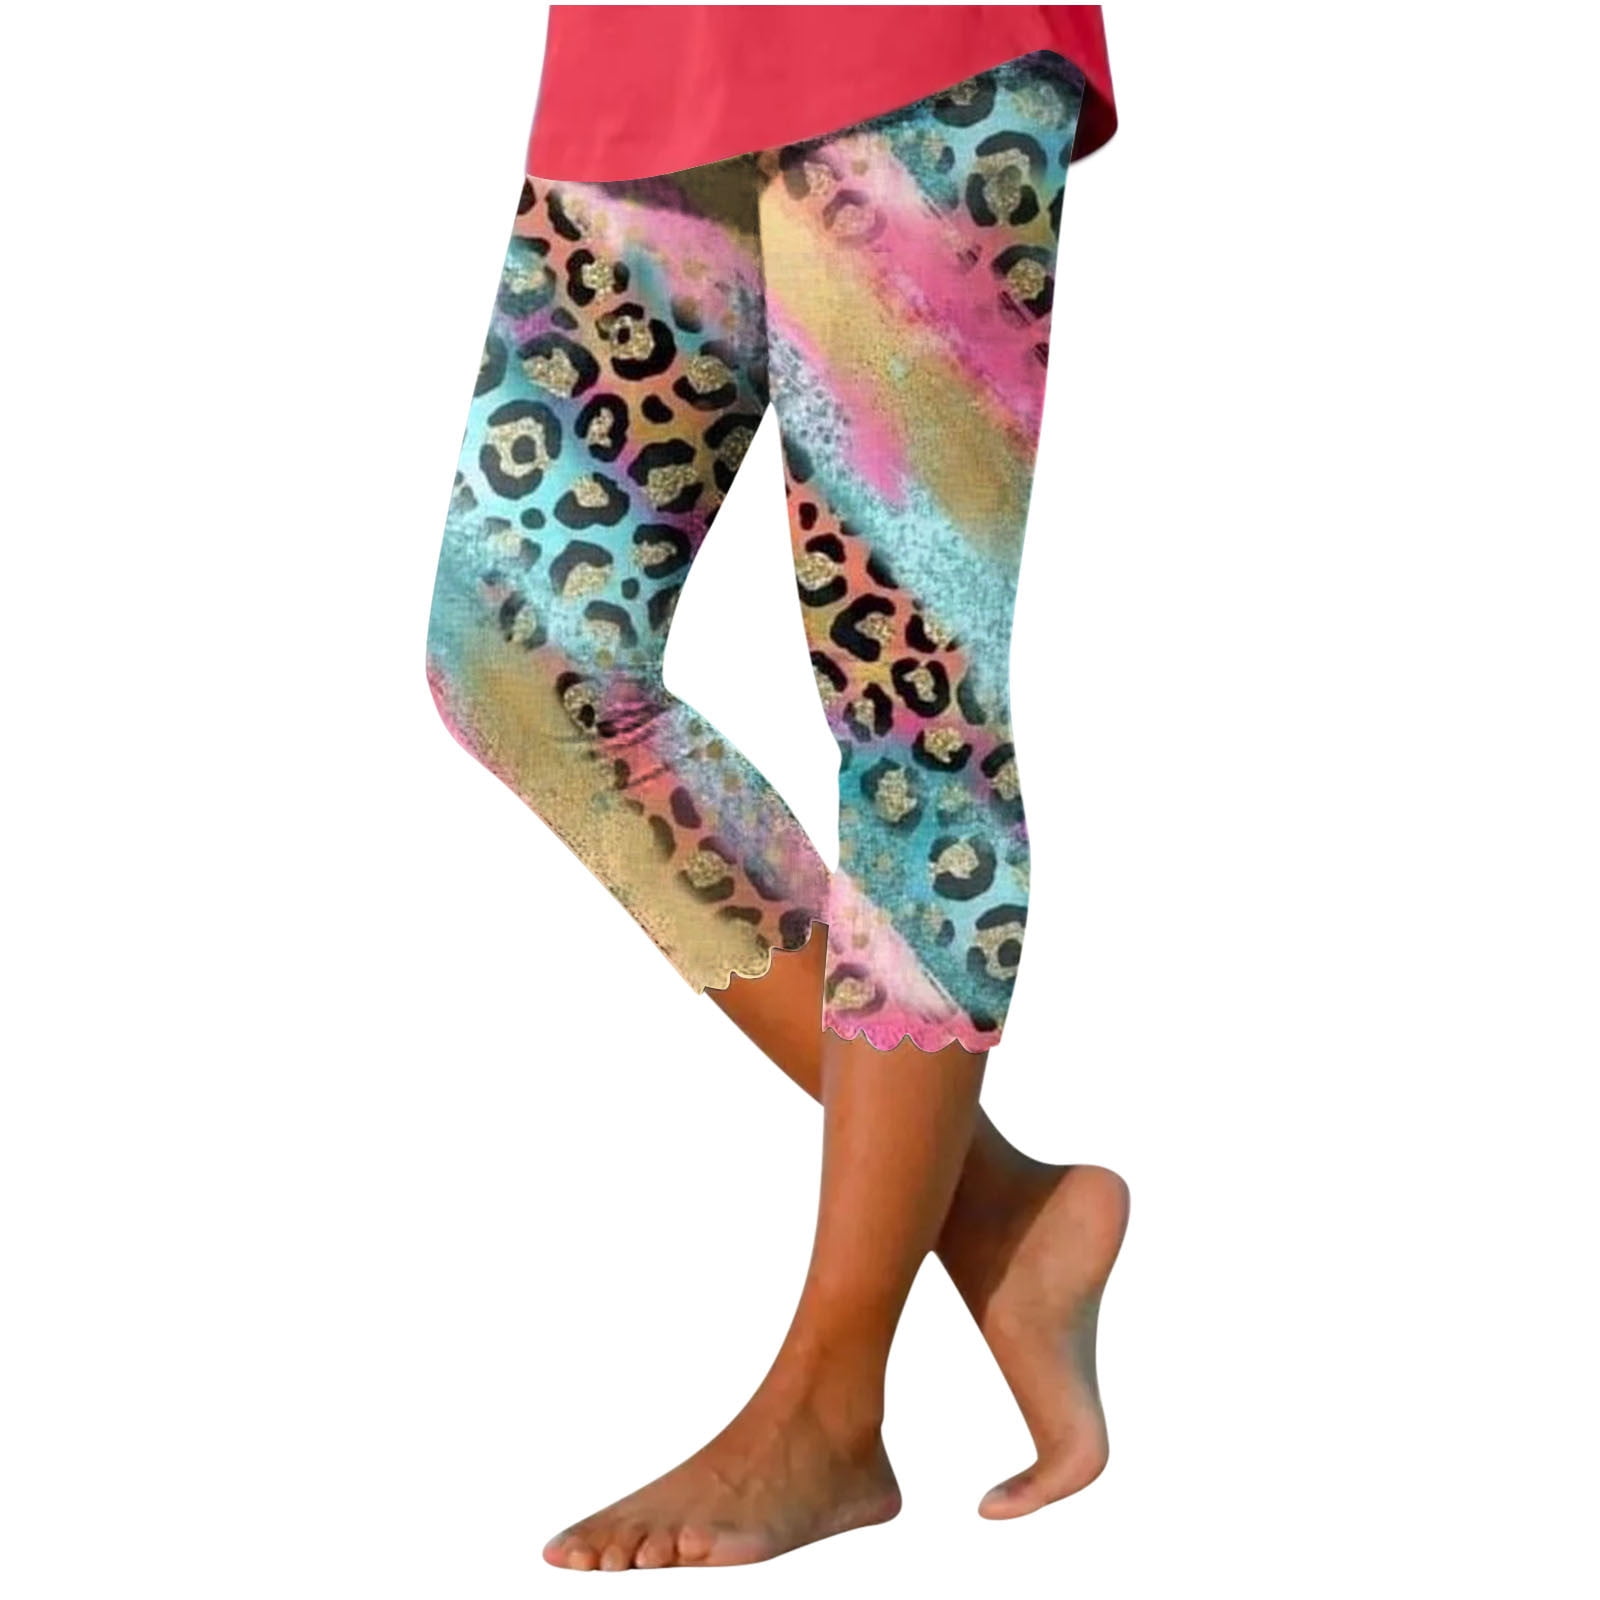 Women's Cropped & Capri Leggings: Shop for Active Bottoms and More